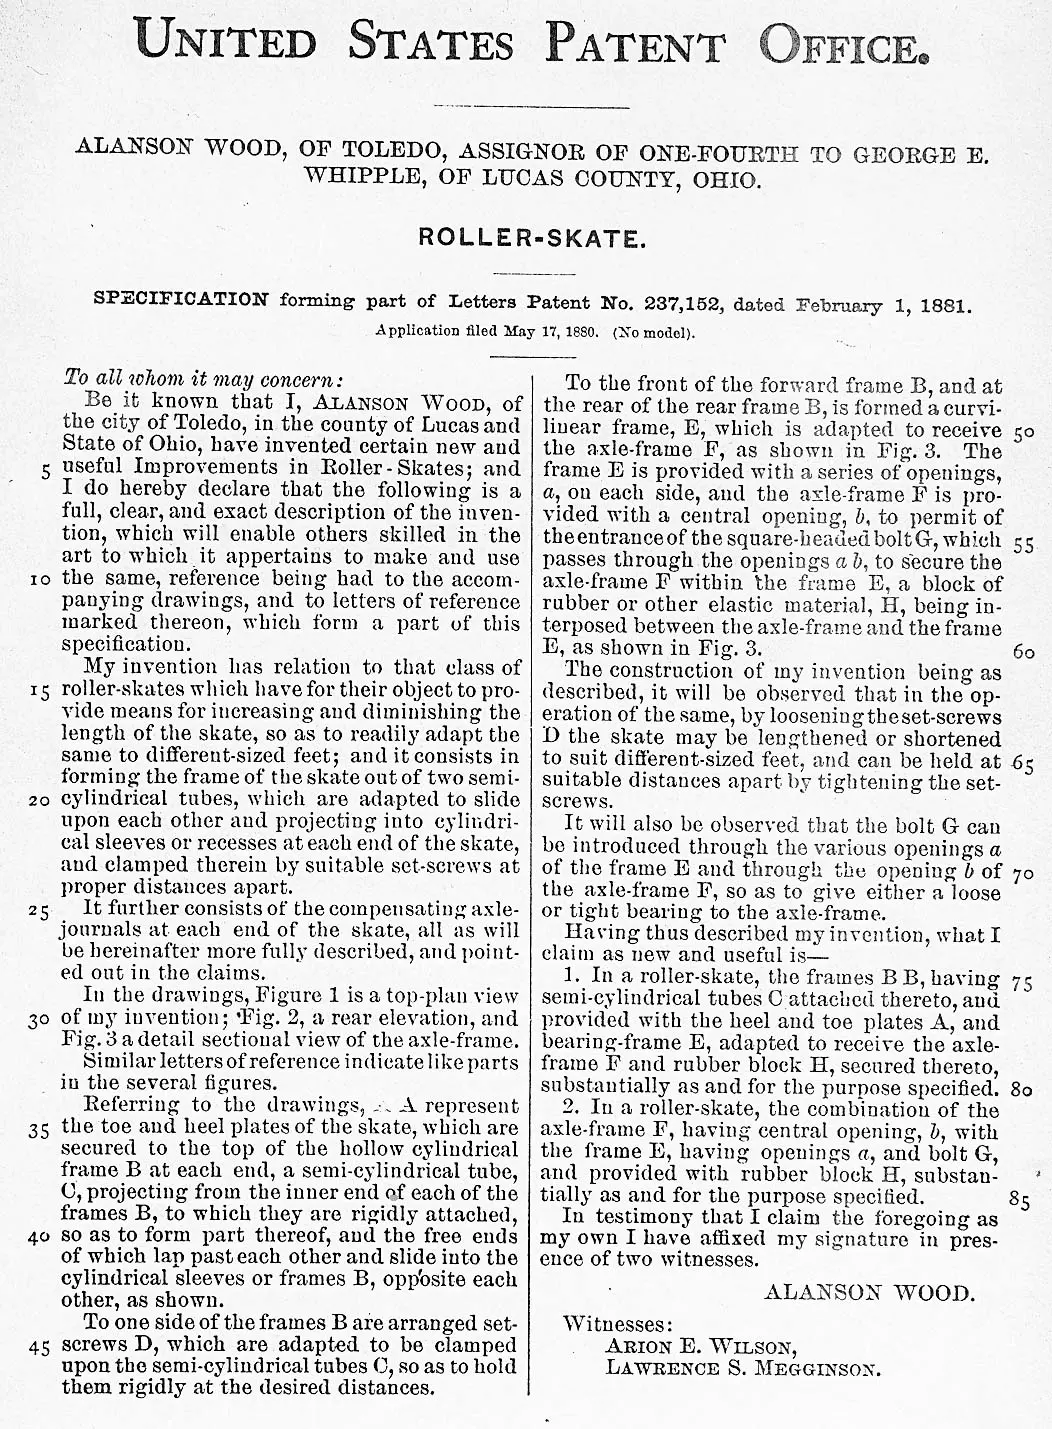 Full-text of Wood's patent for an improved roller skate - U.S. Patent #237,152 (Feb. 1, 1881)